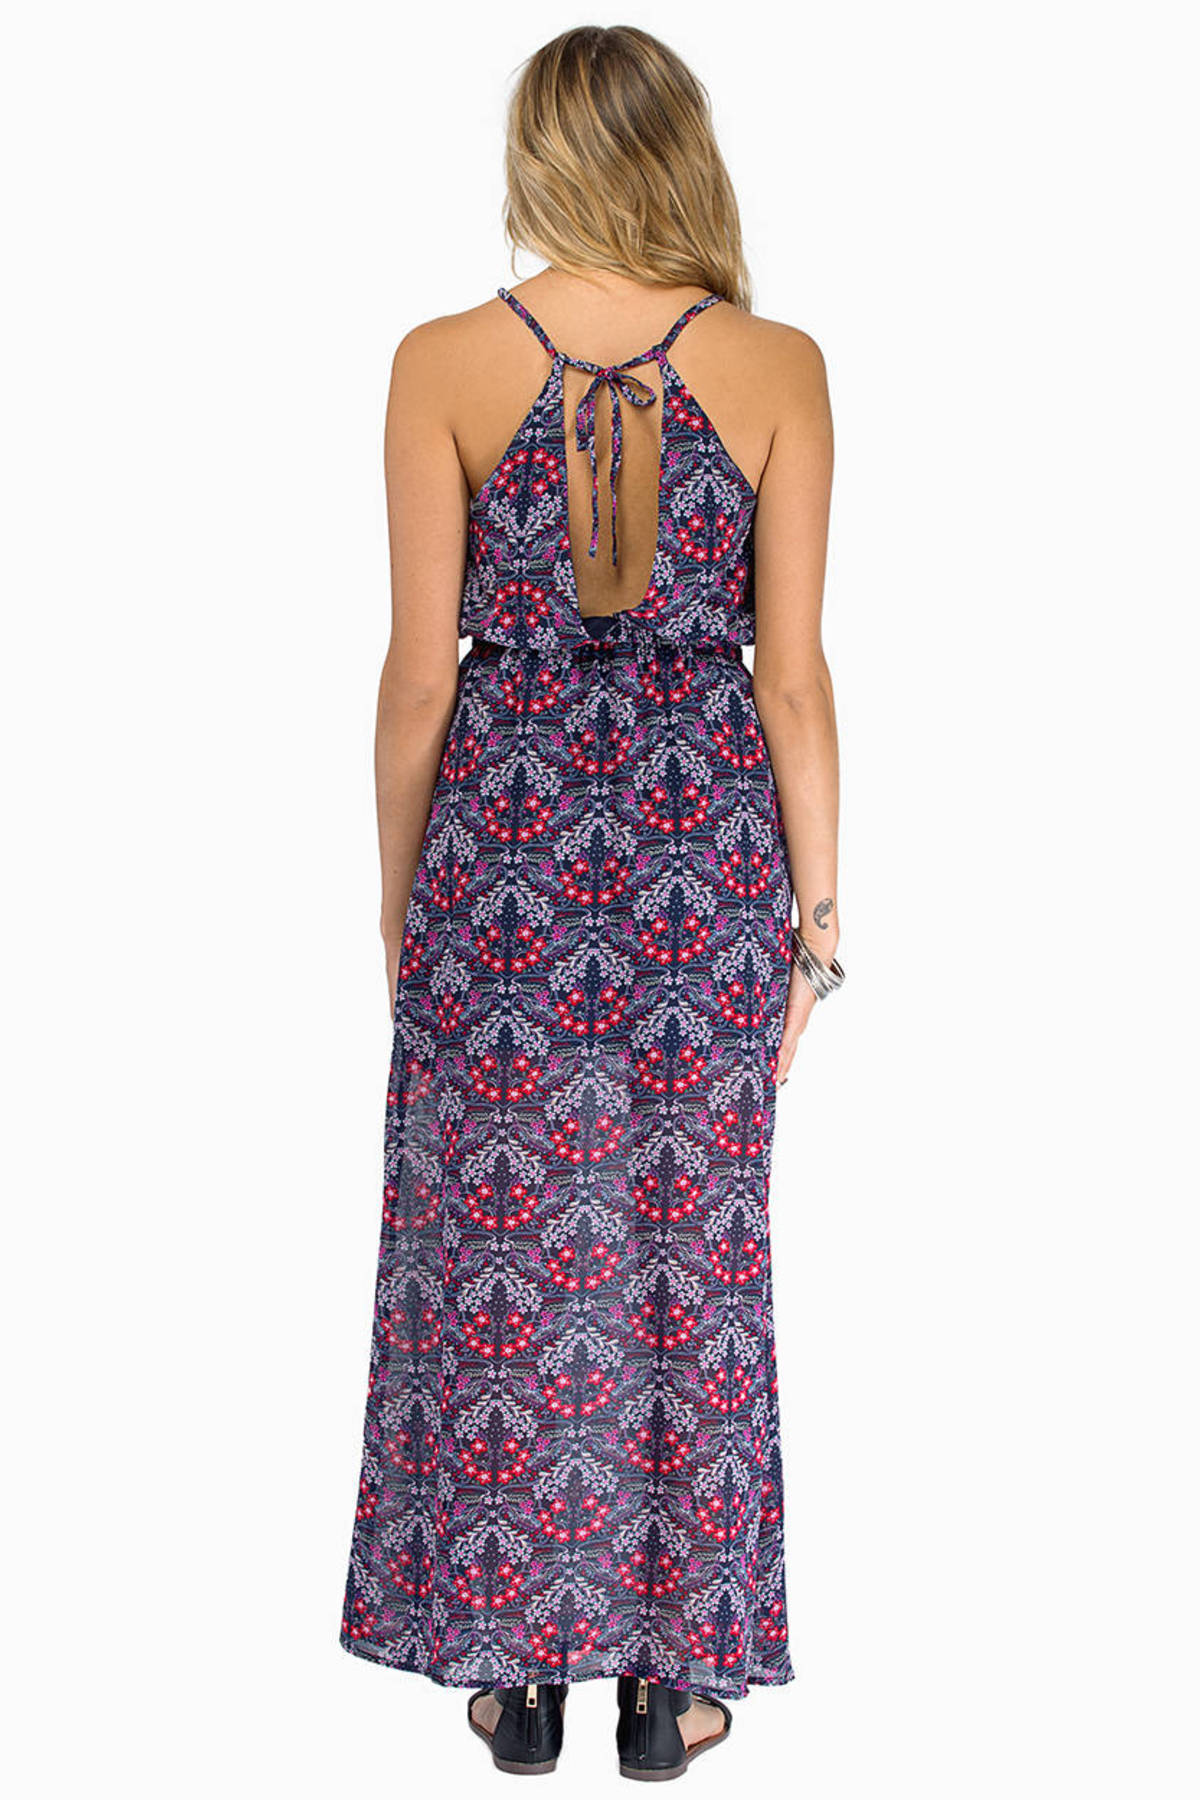 Around The Roses Maxi Dress in Navy Floral - $10 | Tobi US